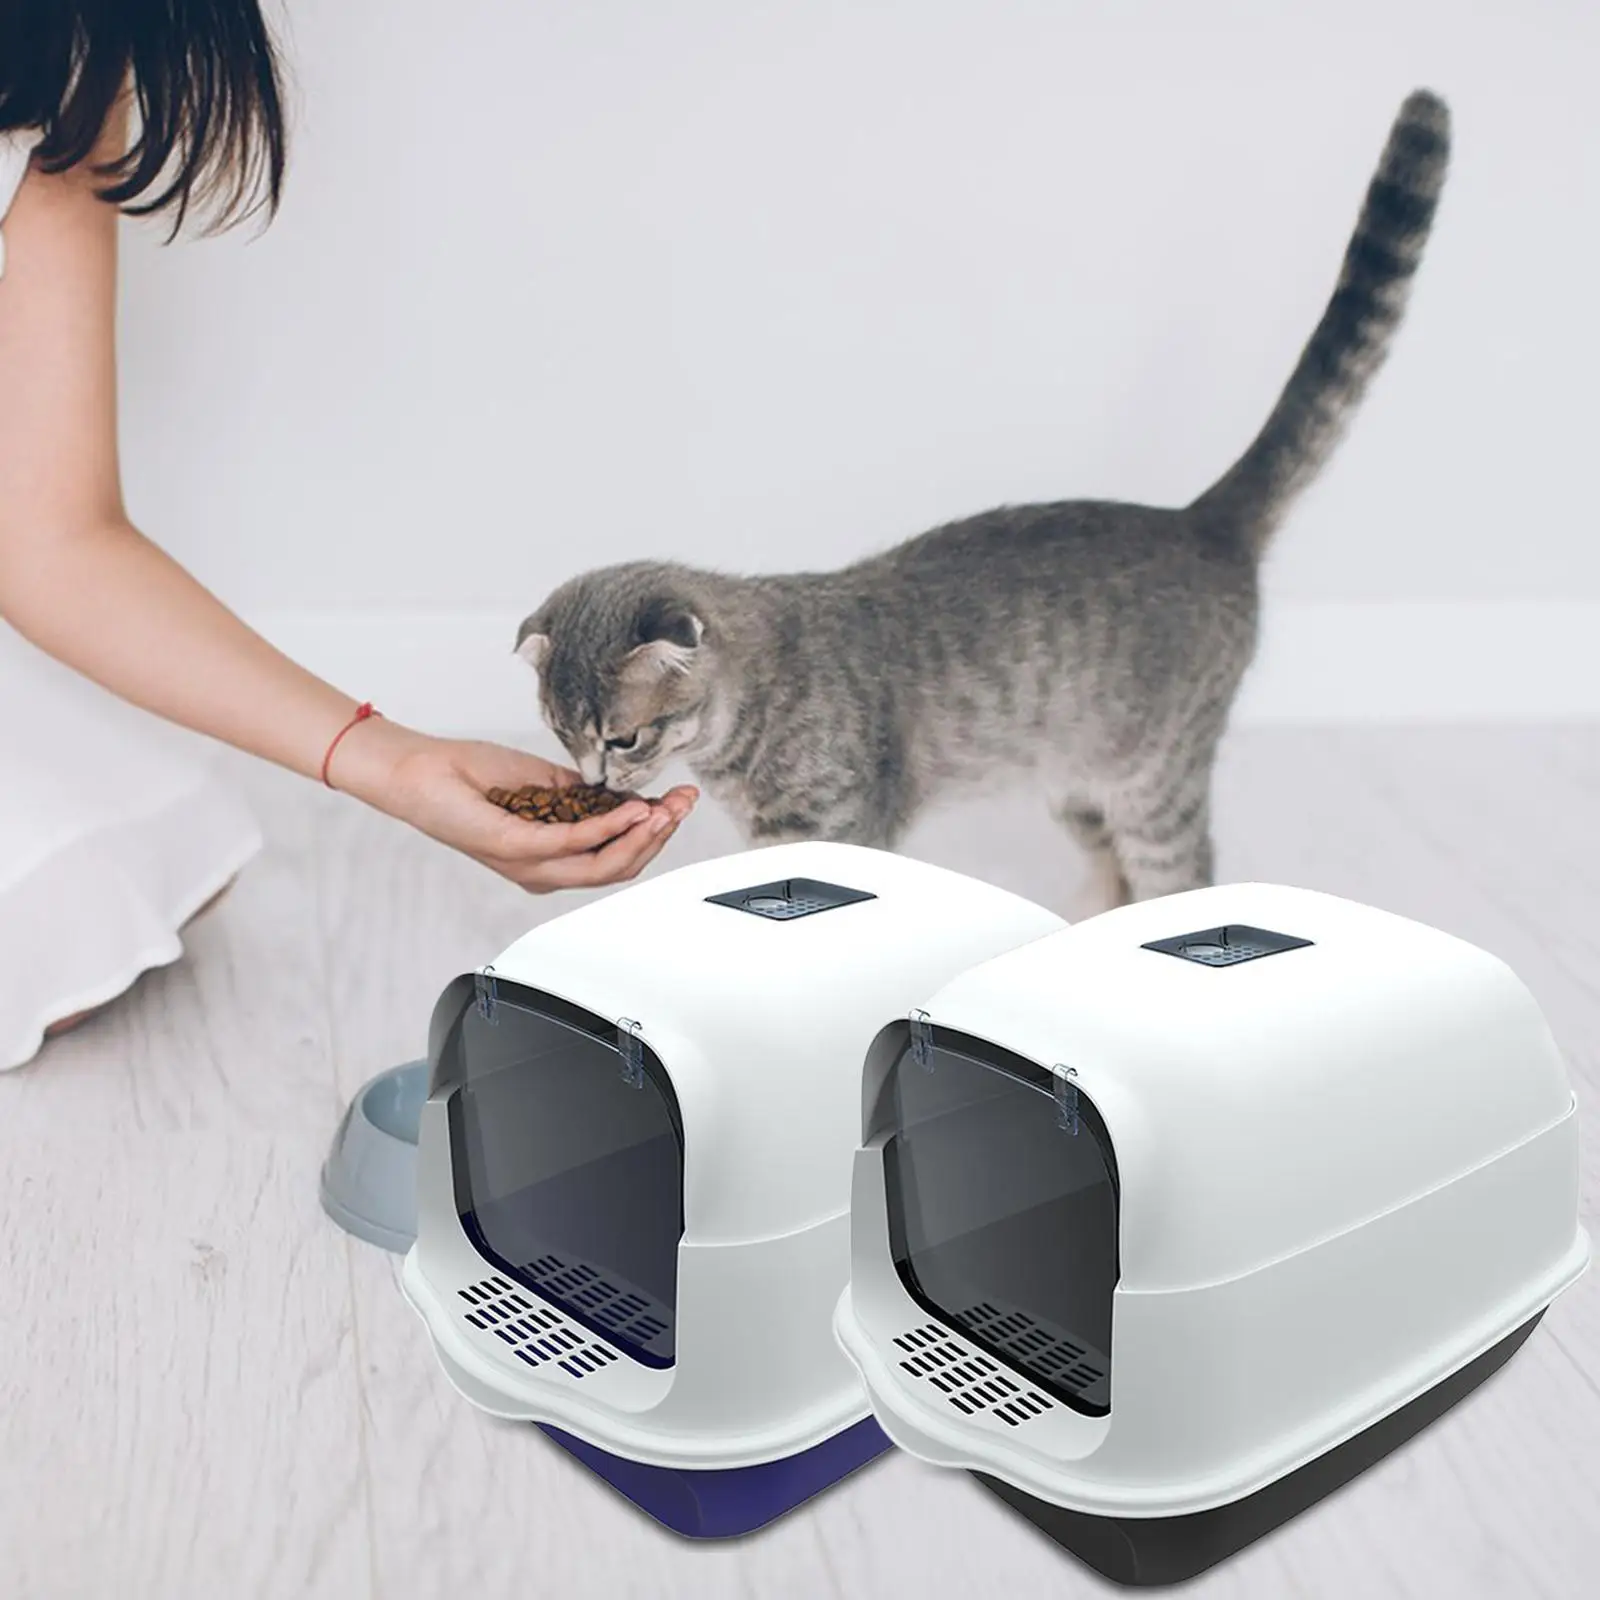 Hooded Cat Pet Litter Tray Enclosed and Covered Cat Toilet with Front Door Flap Easy to Clean Kitten Potty Pet Accessories